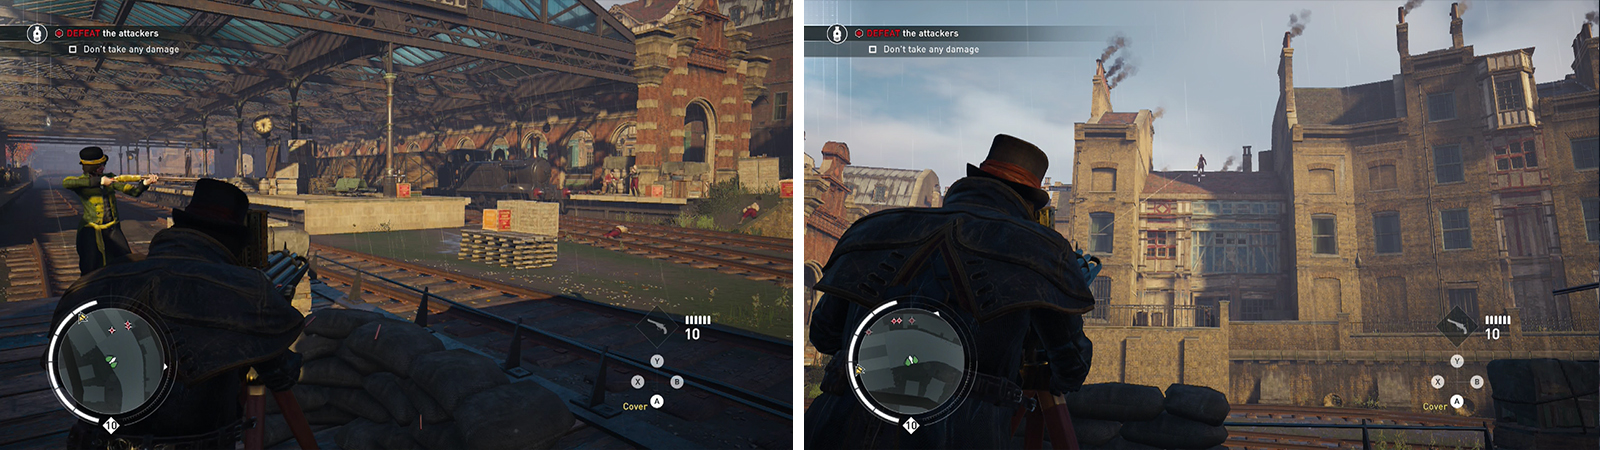 Watch out for enemies on the station platforms (left) and the rooftops on the right (right).